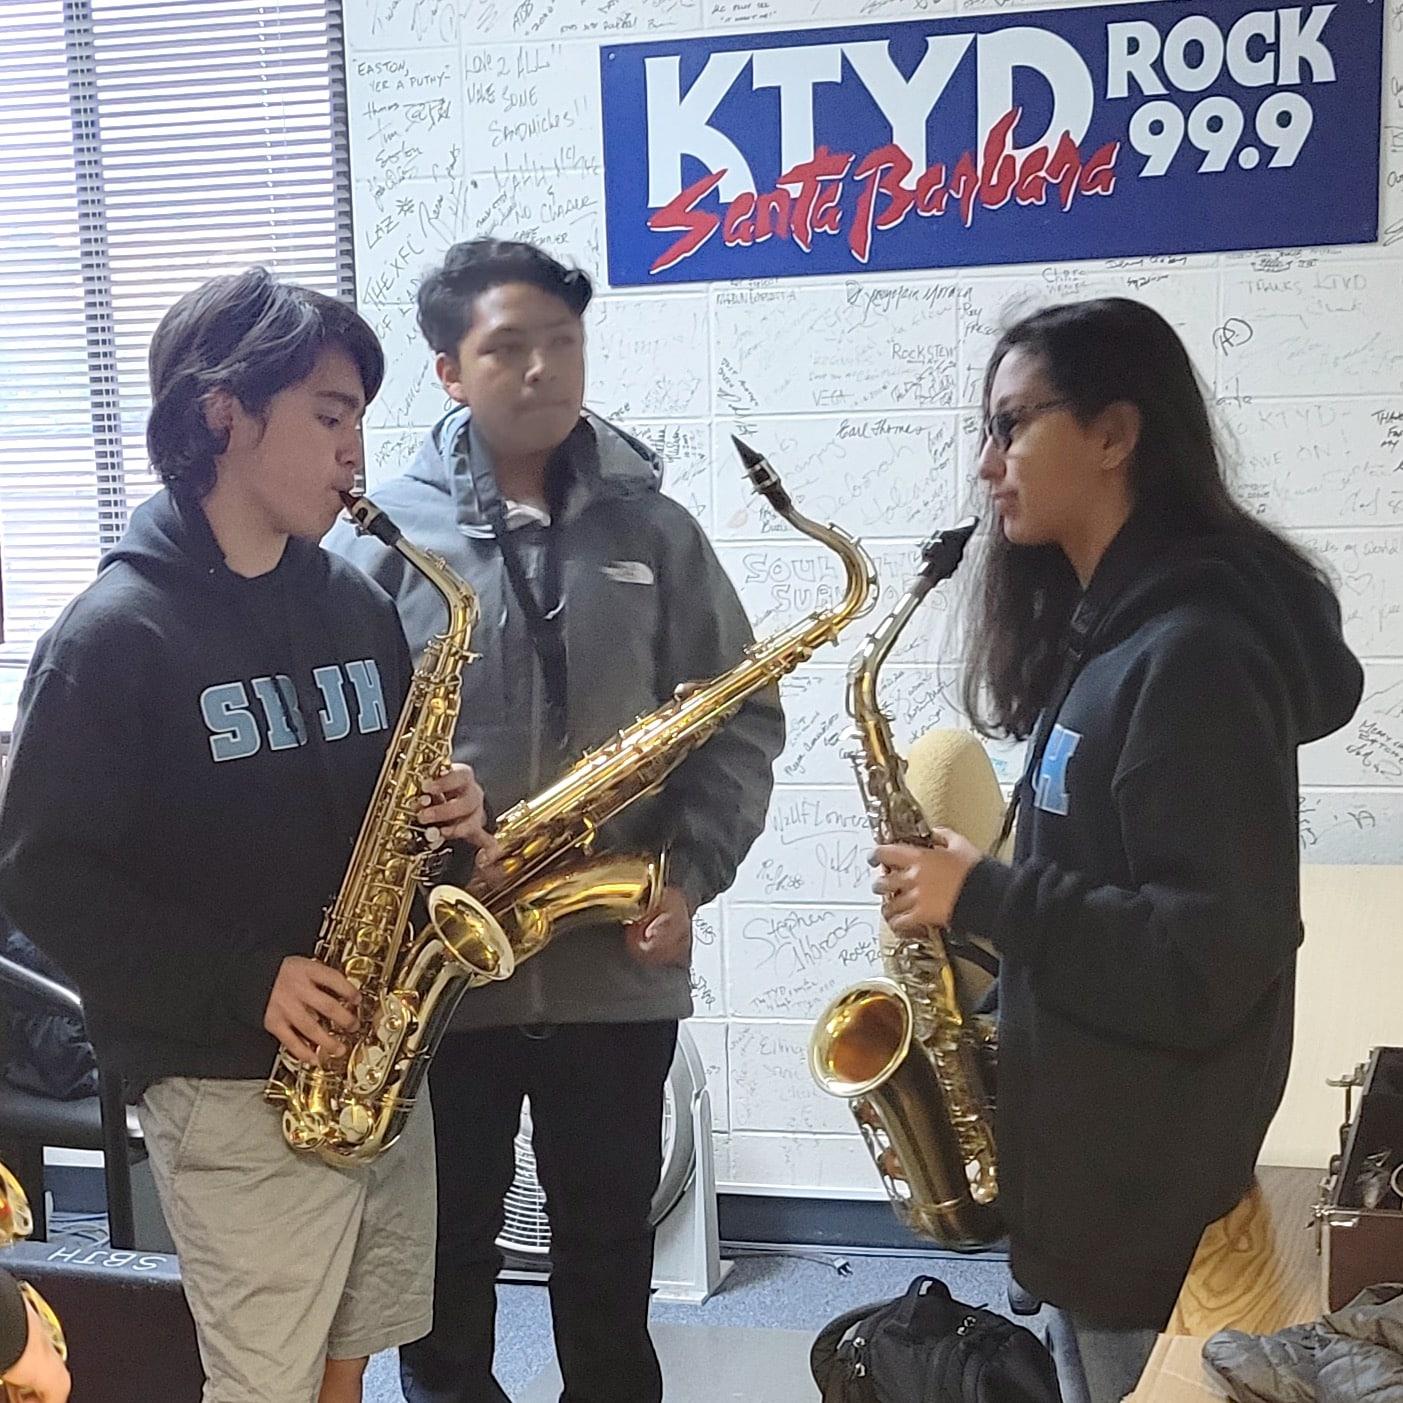 Santa Barbara Education Foundation and 99.9 KTYD Work to Amplify Community Support for Music Education